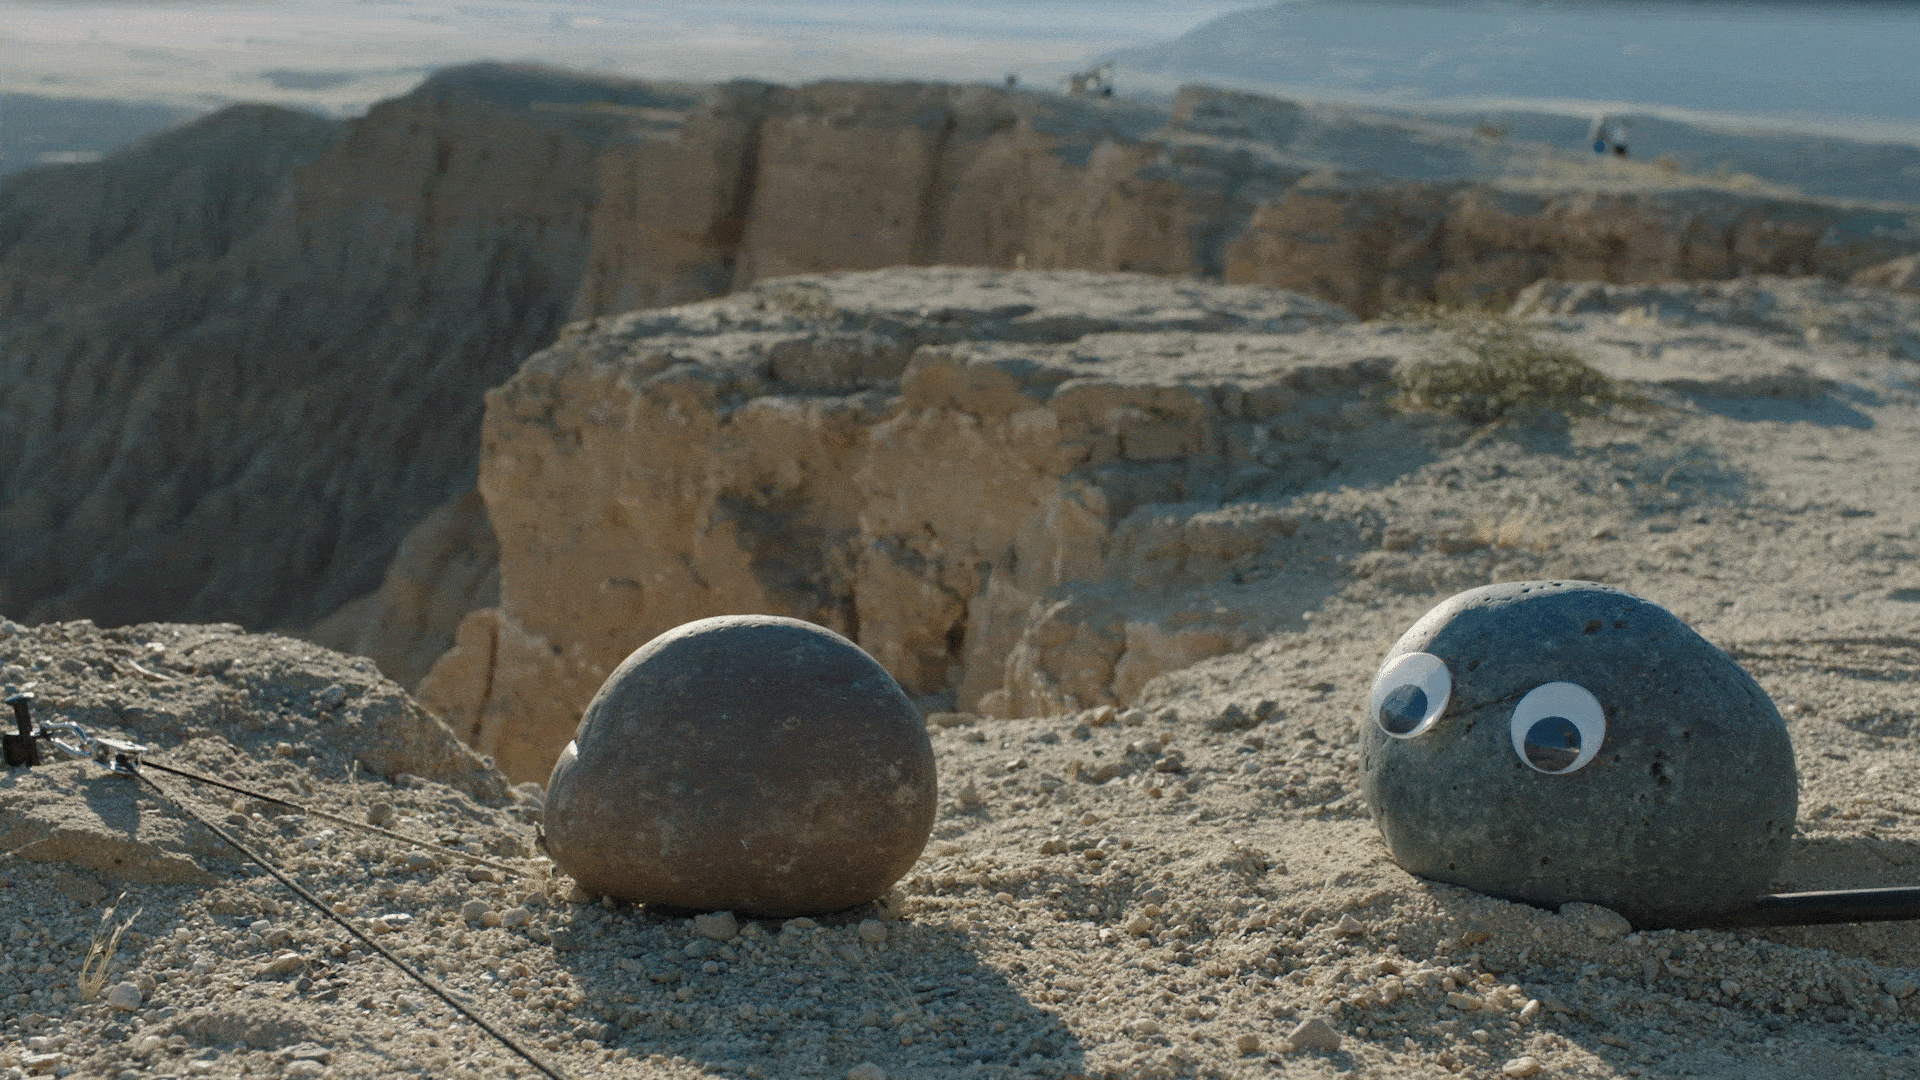 A special effects clip of rocks moving across sand from the film, "Everything Everywhere All at Once".